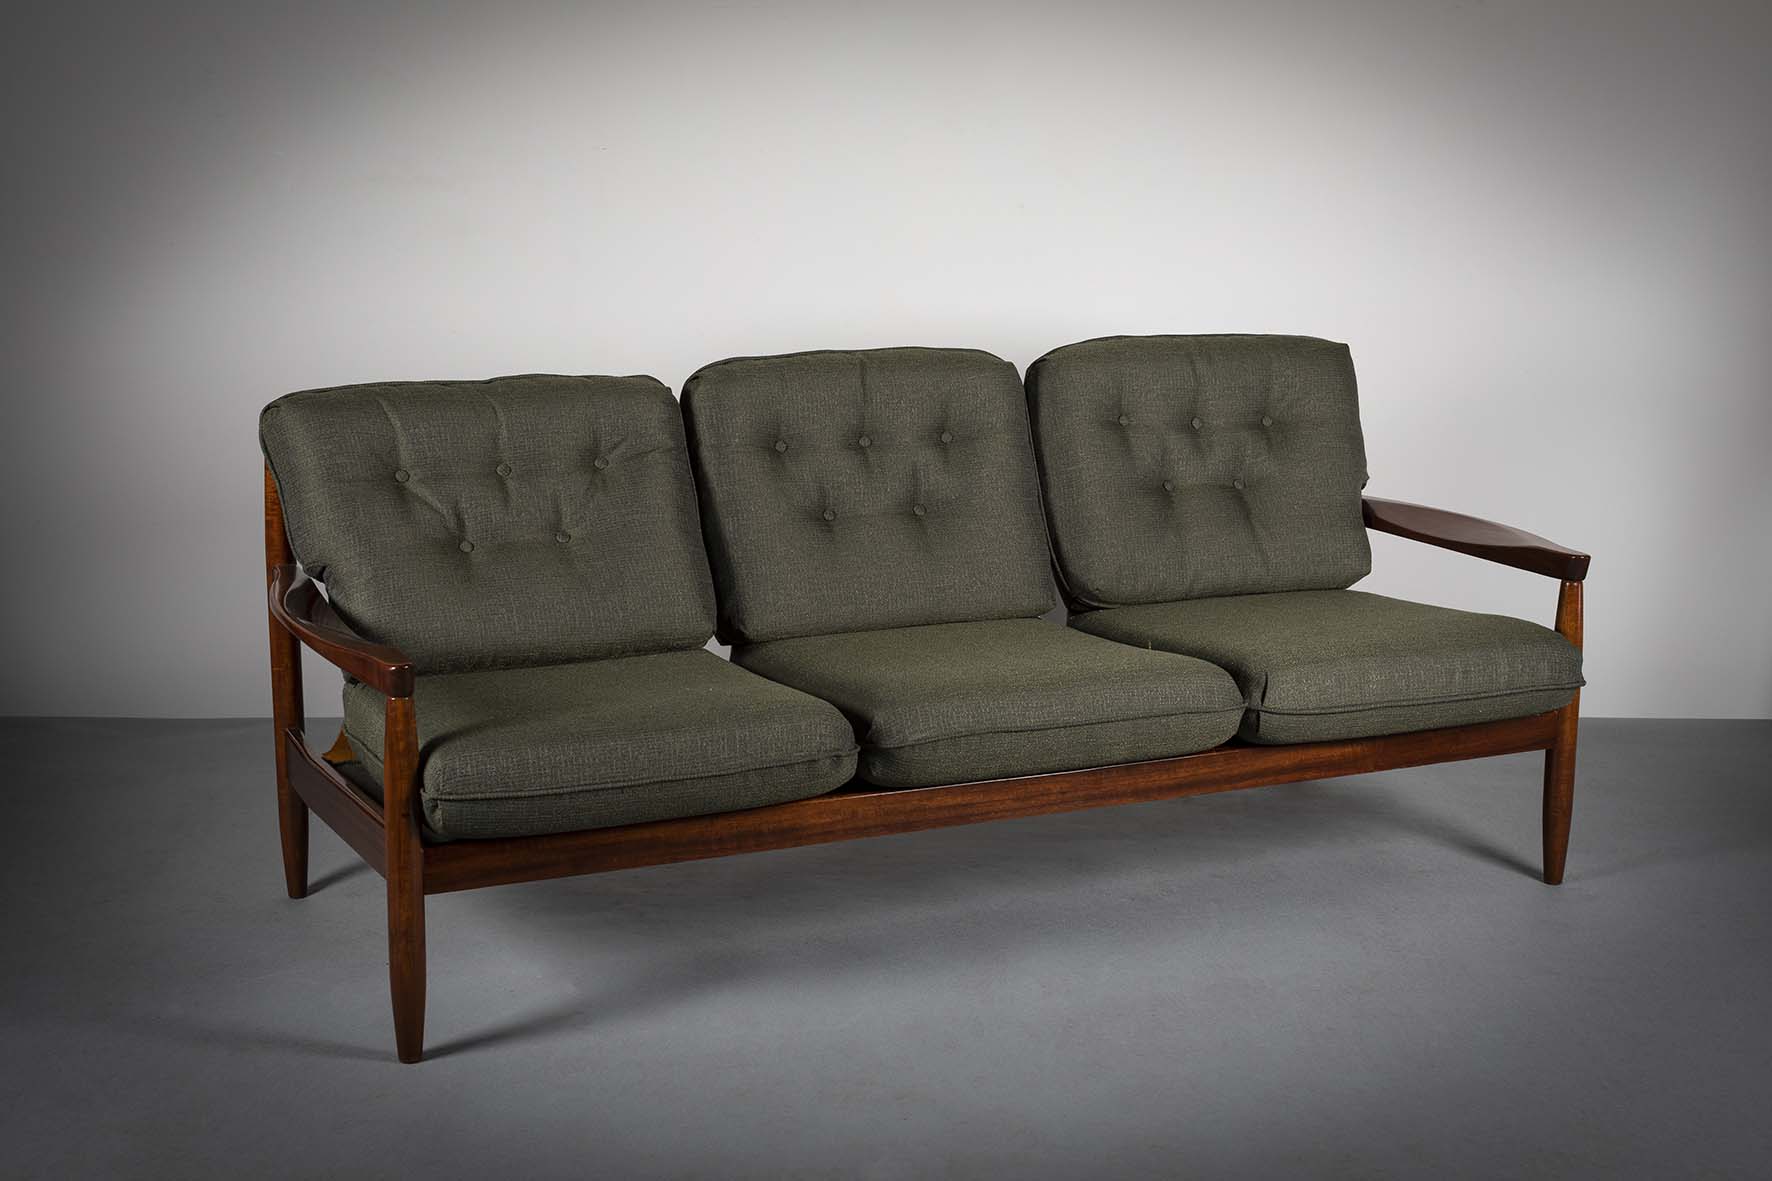 A FINE TEAK THREE PIECE SUITE, DANISH 1970s, the railed backs with shaped arms, on tapering legs, - Image 2 of 3